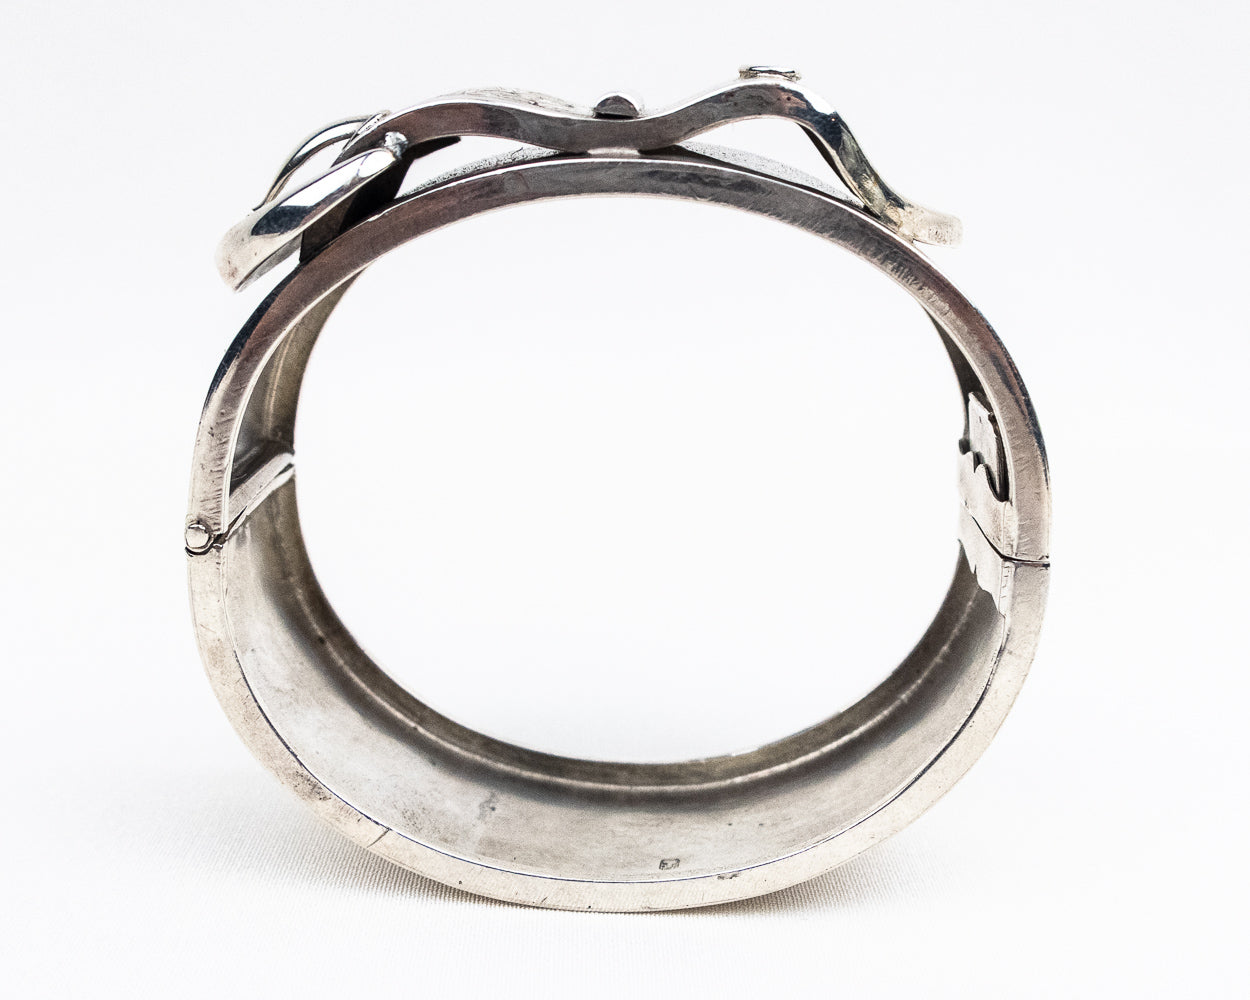 Victorian Engraved Buckle Bangle